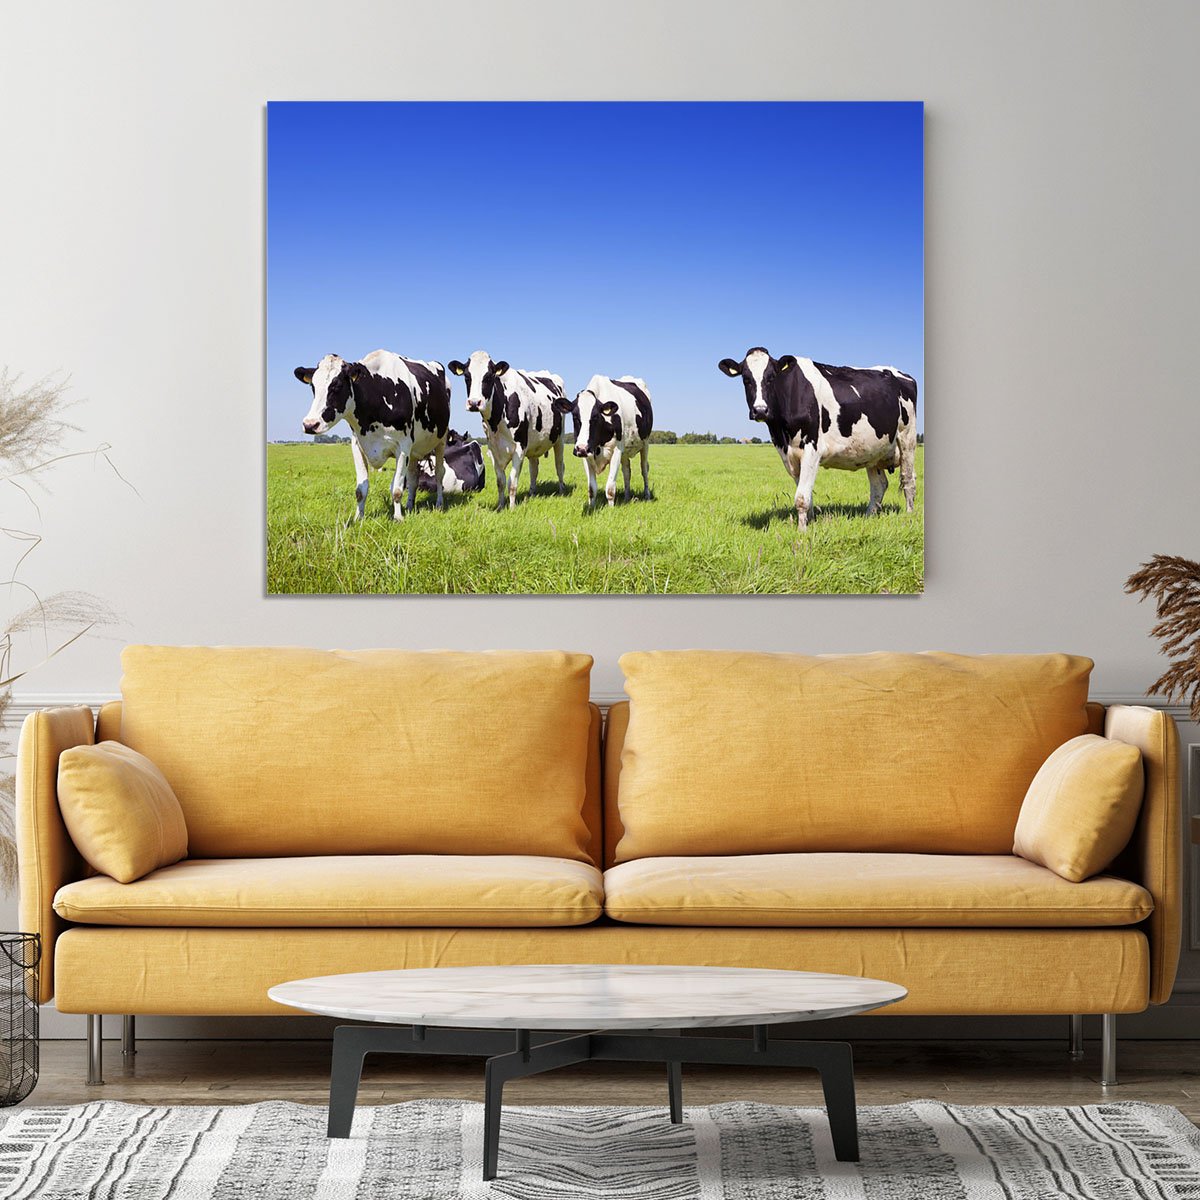 Black and white cows in a grassy field Canvas Print or Poster